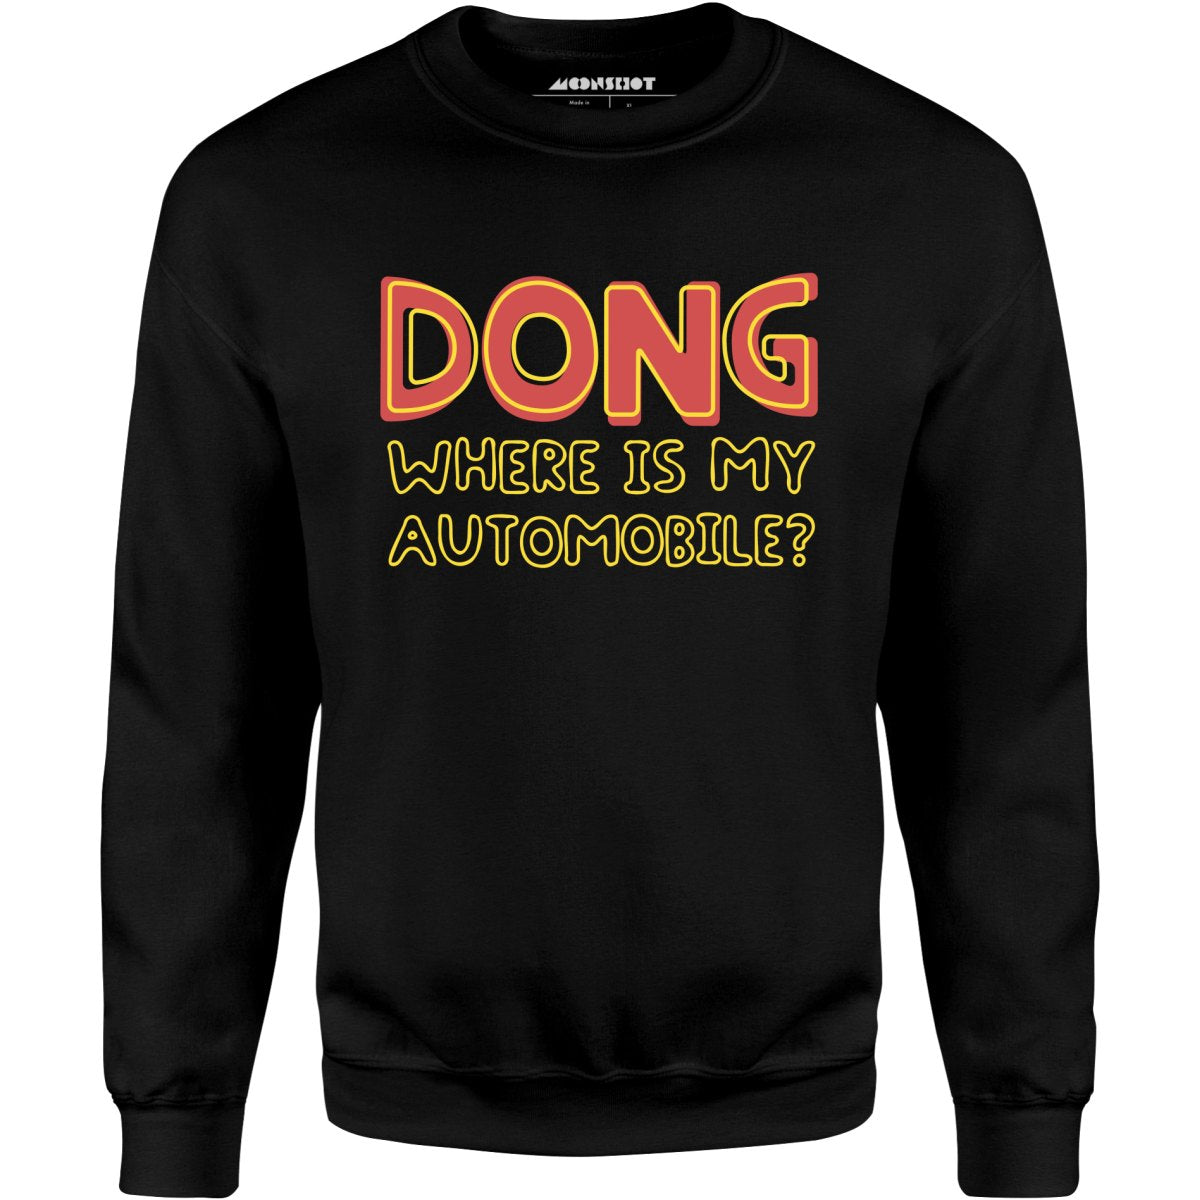 Dong Where is My Automobile? - Unisex Sweatshirt